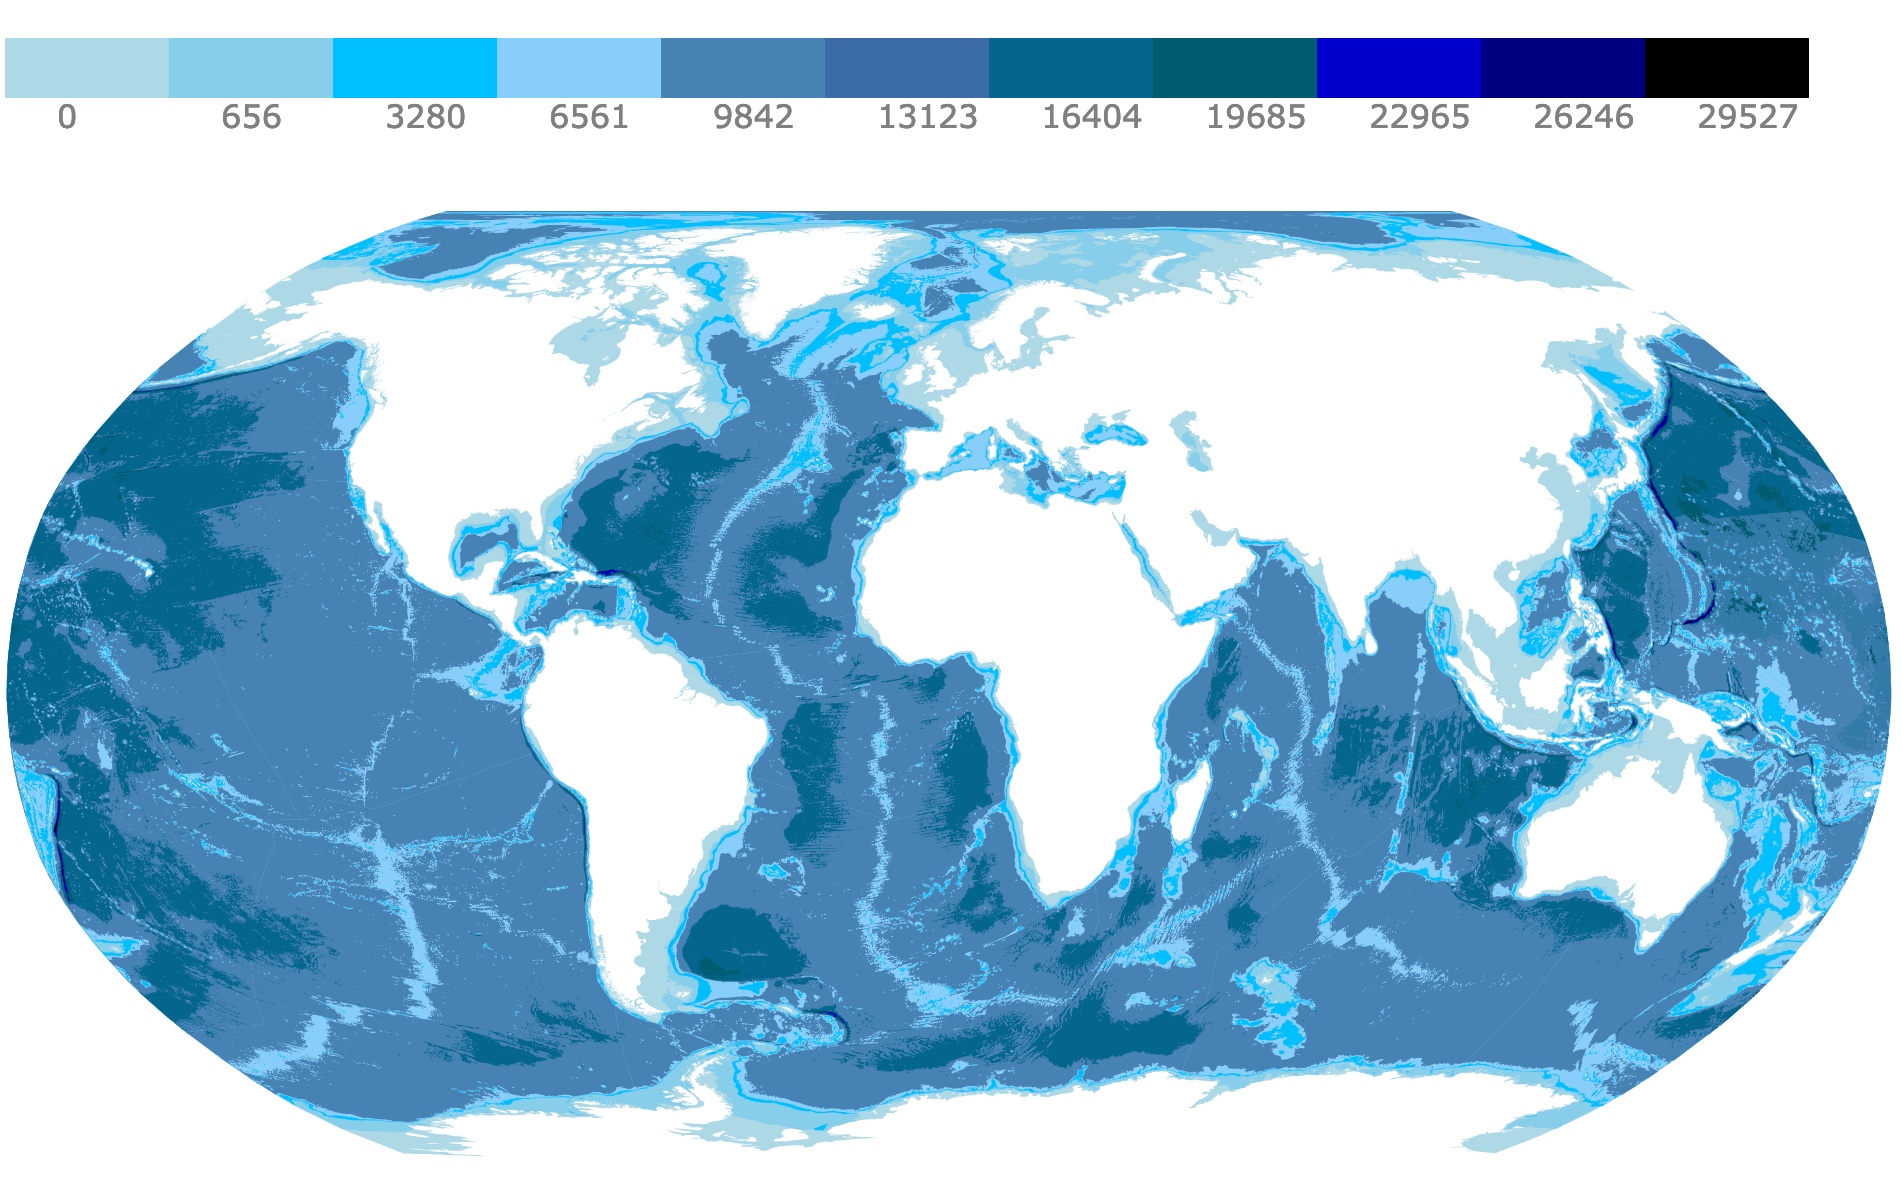 Bathymetry map of the world showing seafloor depth